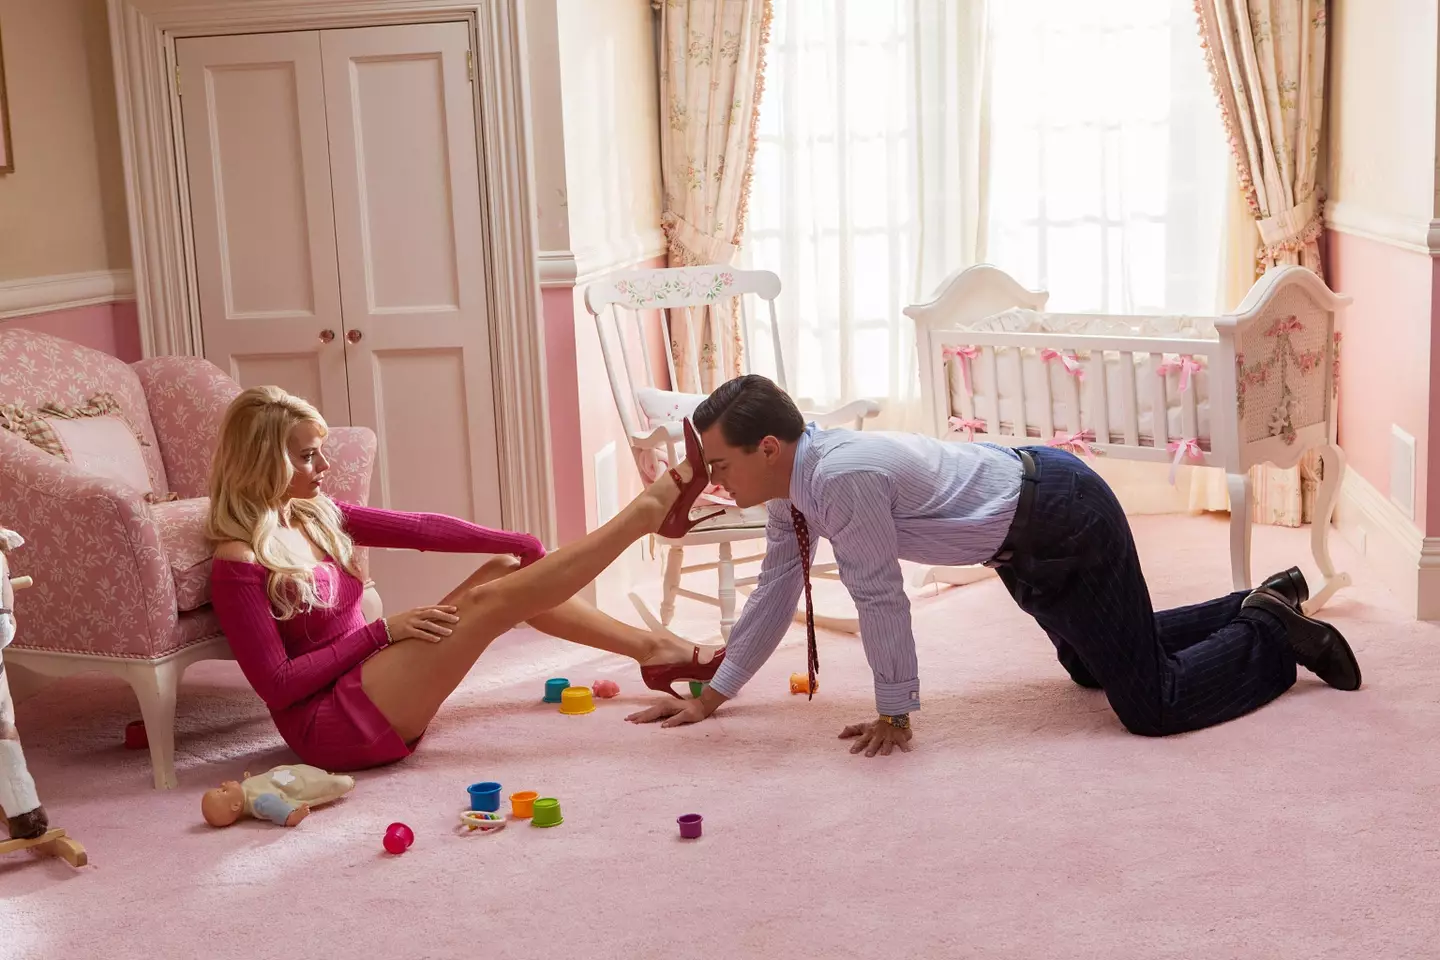 Robbie and Leonardo DiCaprio in The Wolf of Wall Street.